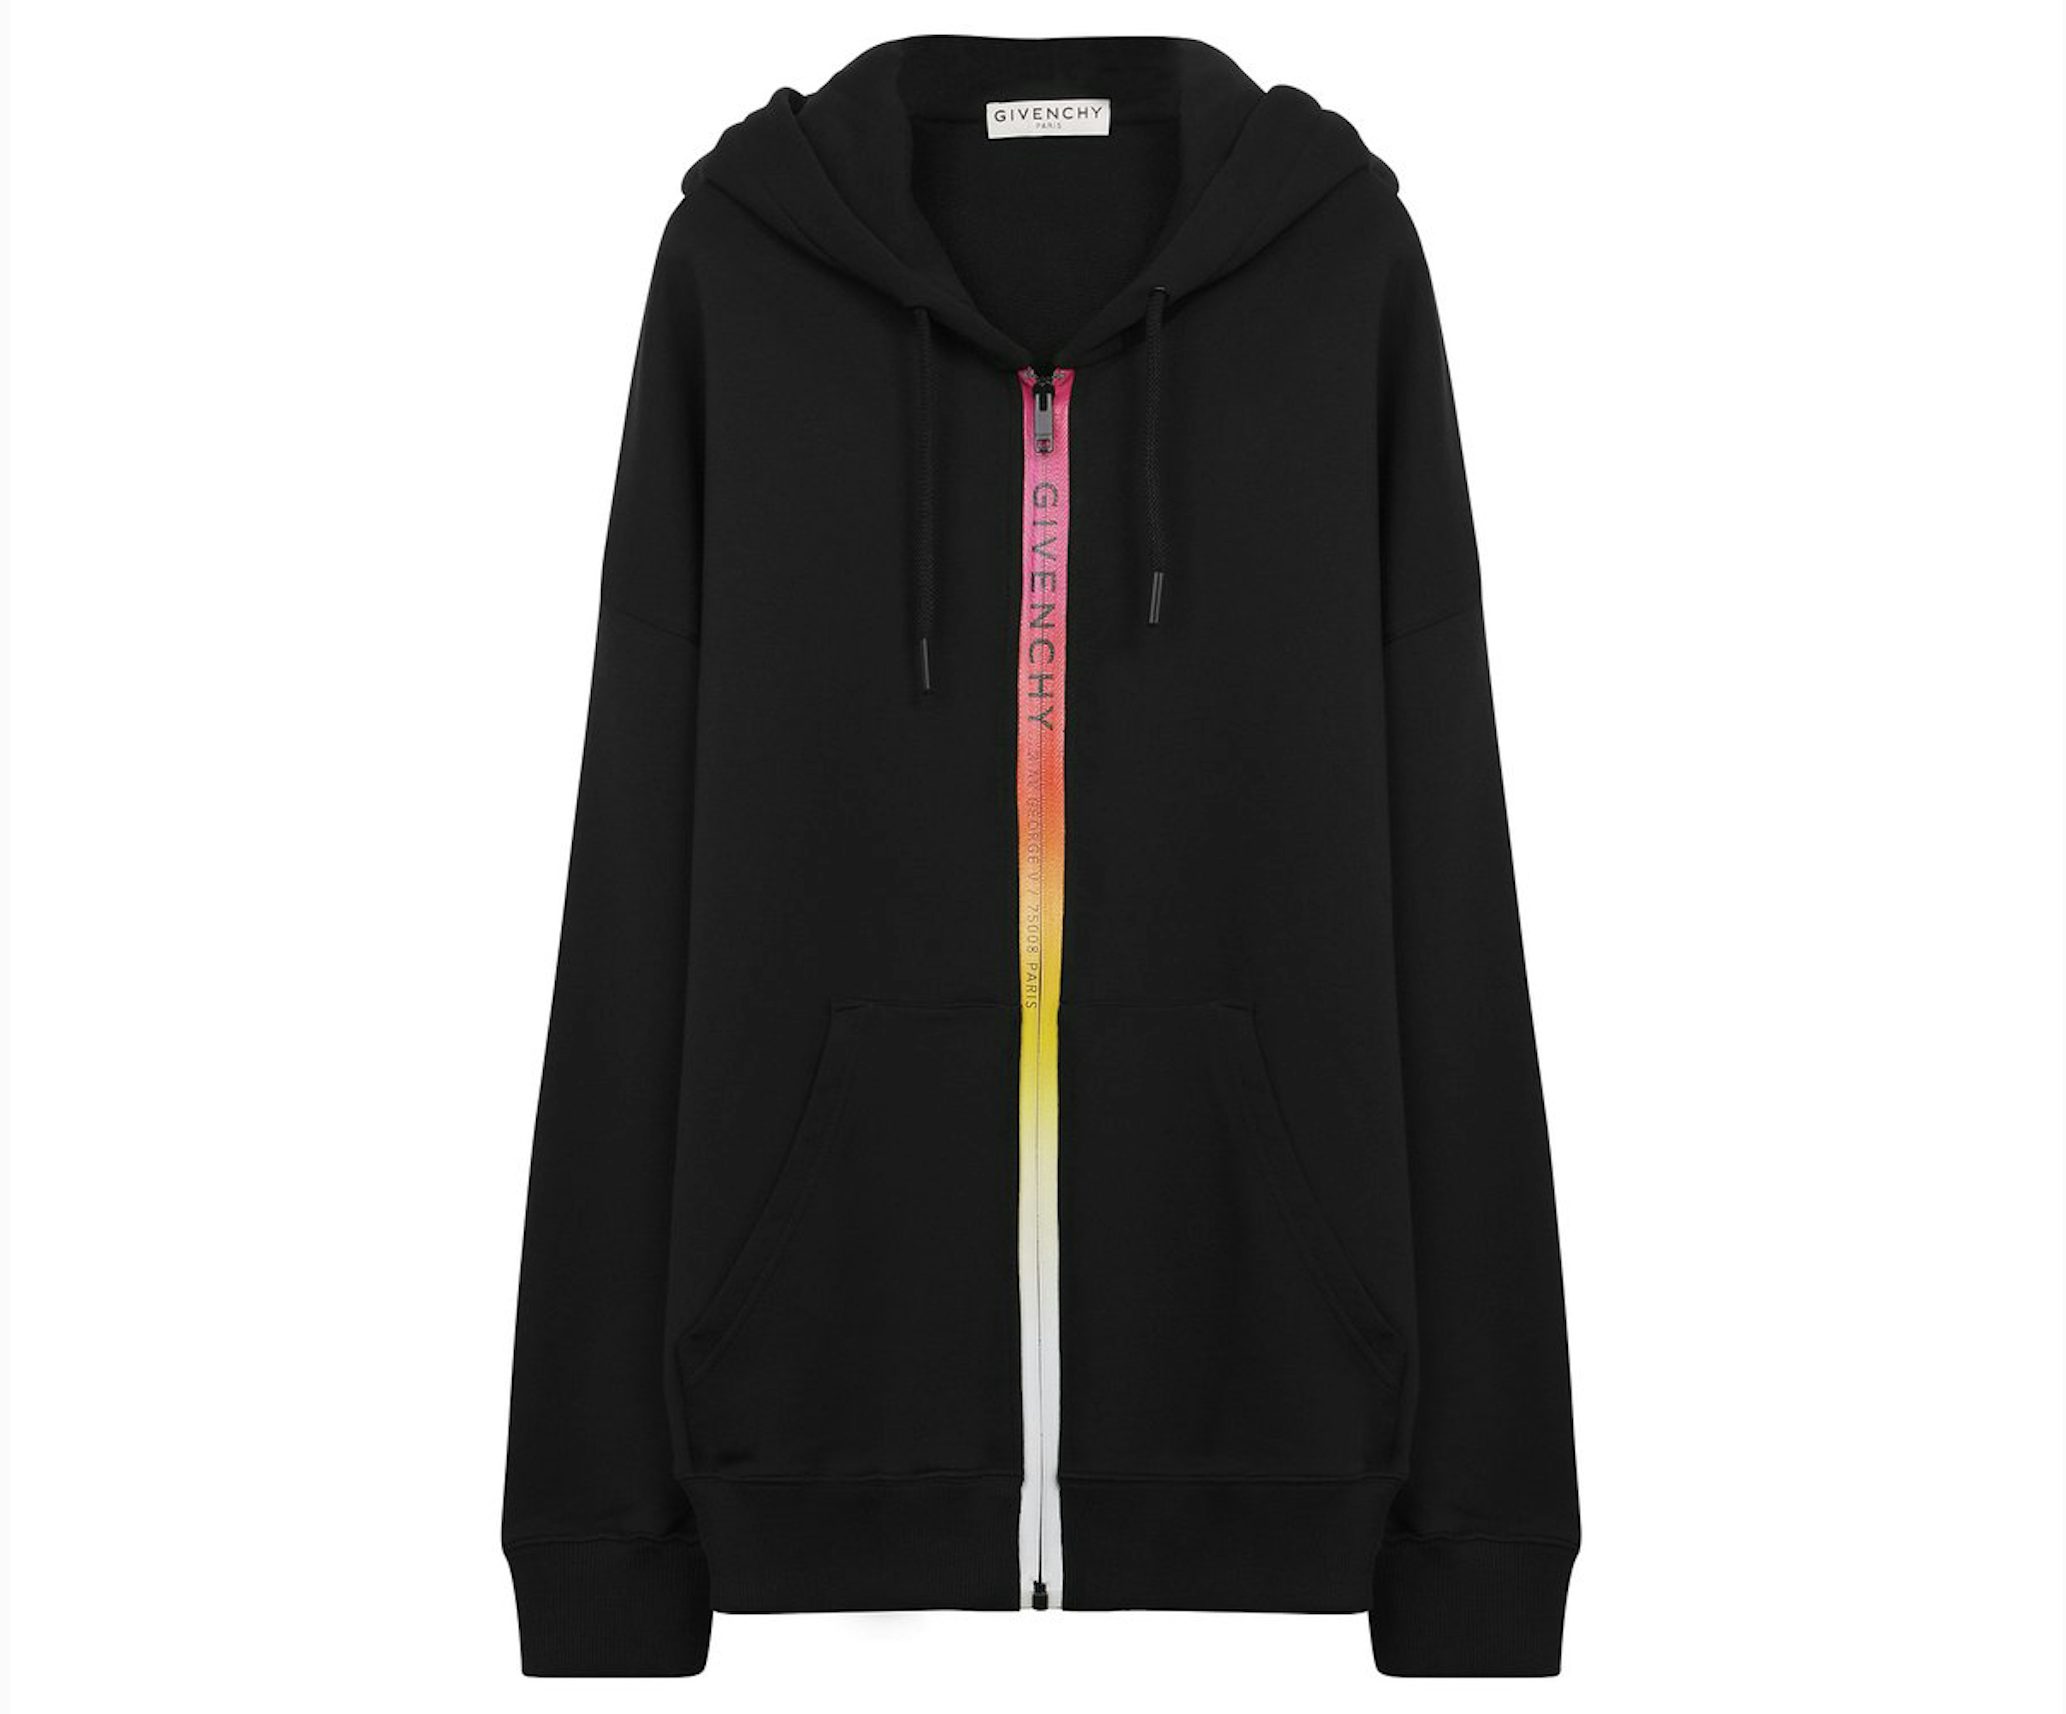 Givenchy FW22 4G monogram zip up shirt – As You Can See